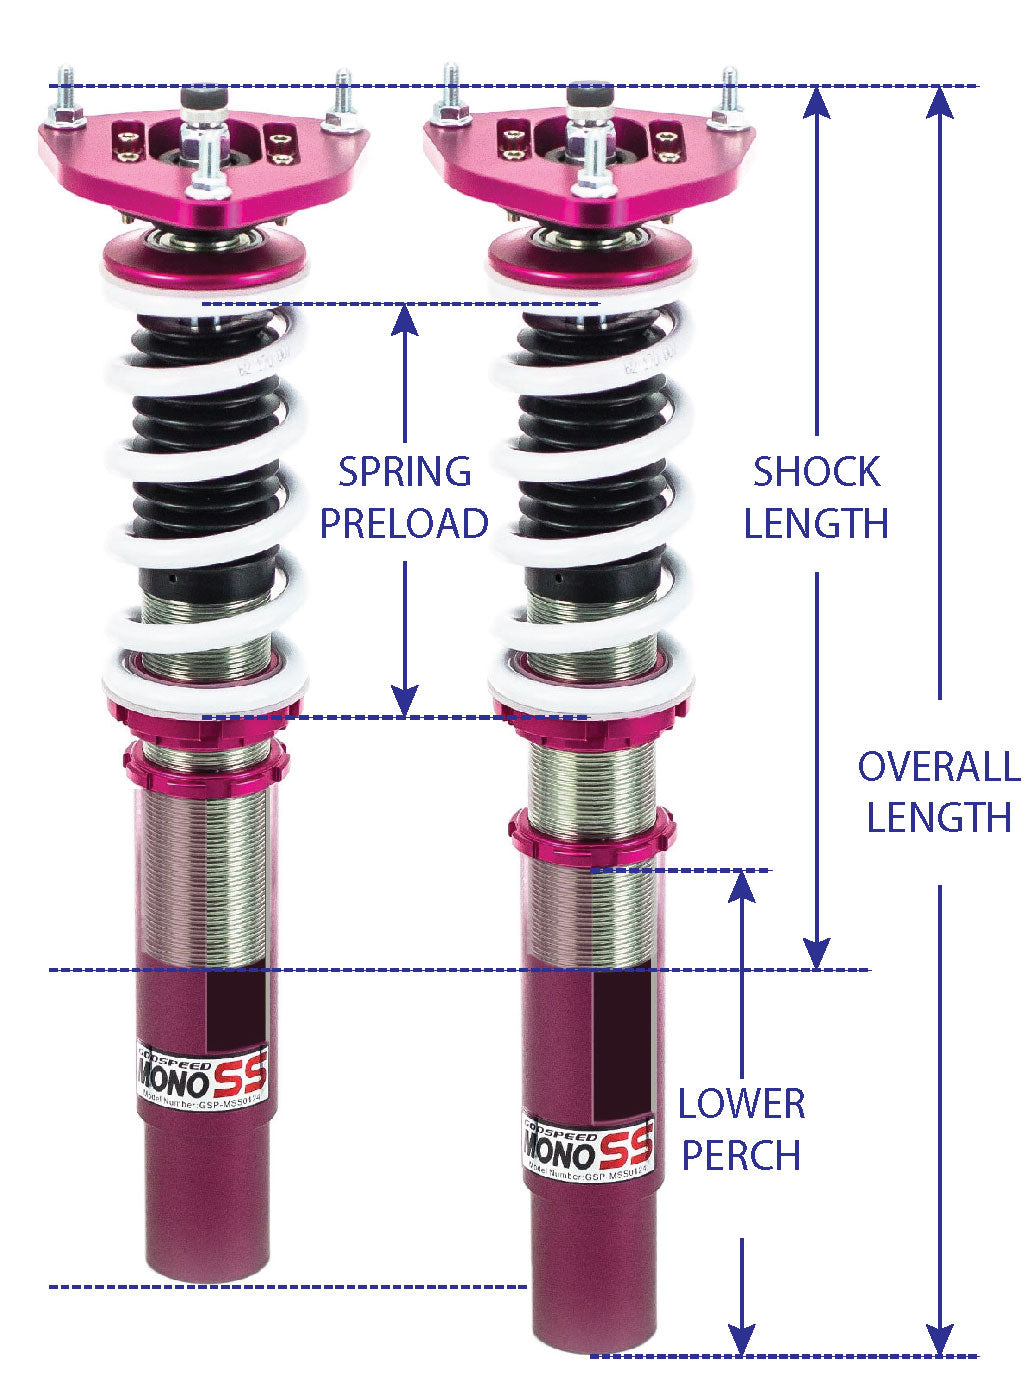 How to set coilover preload